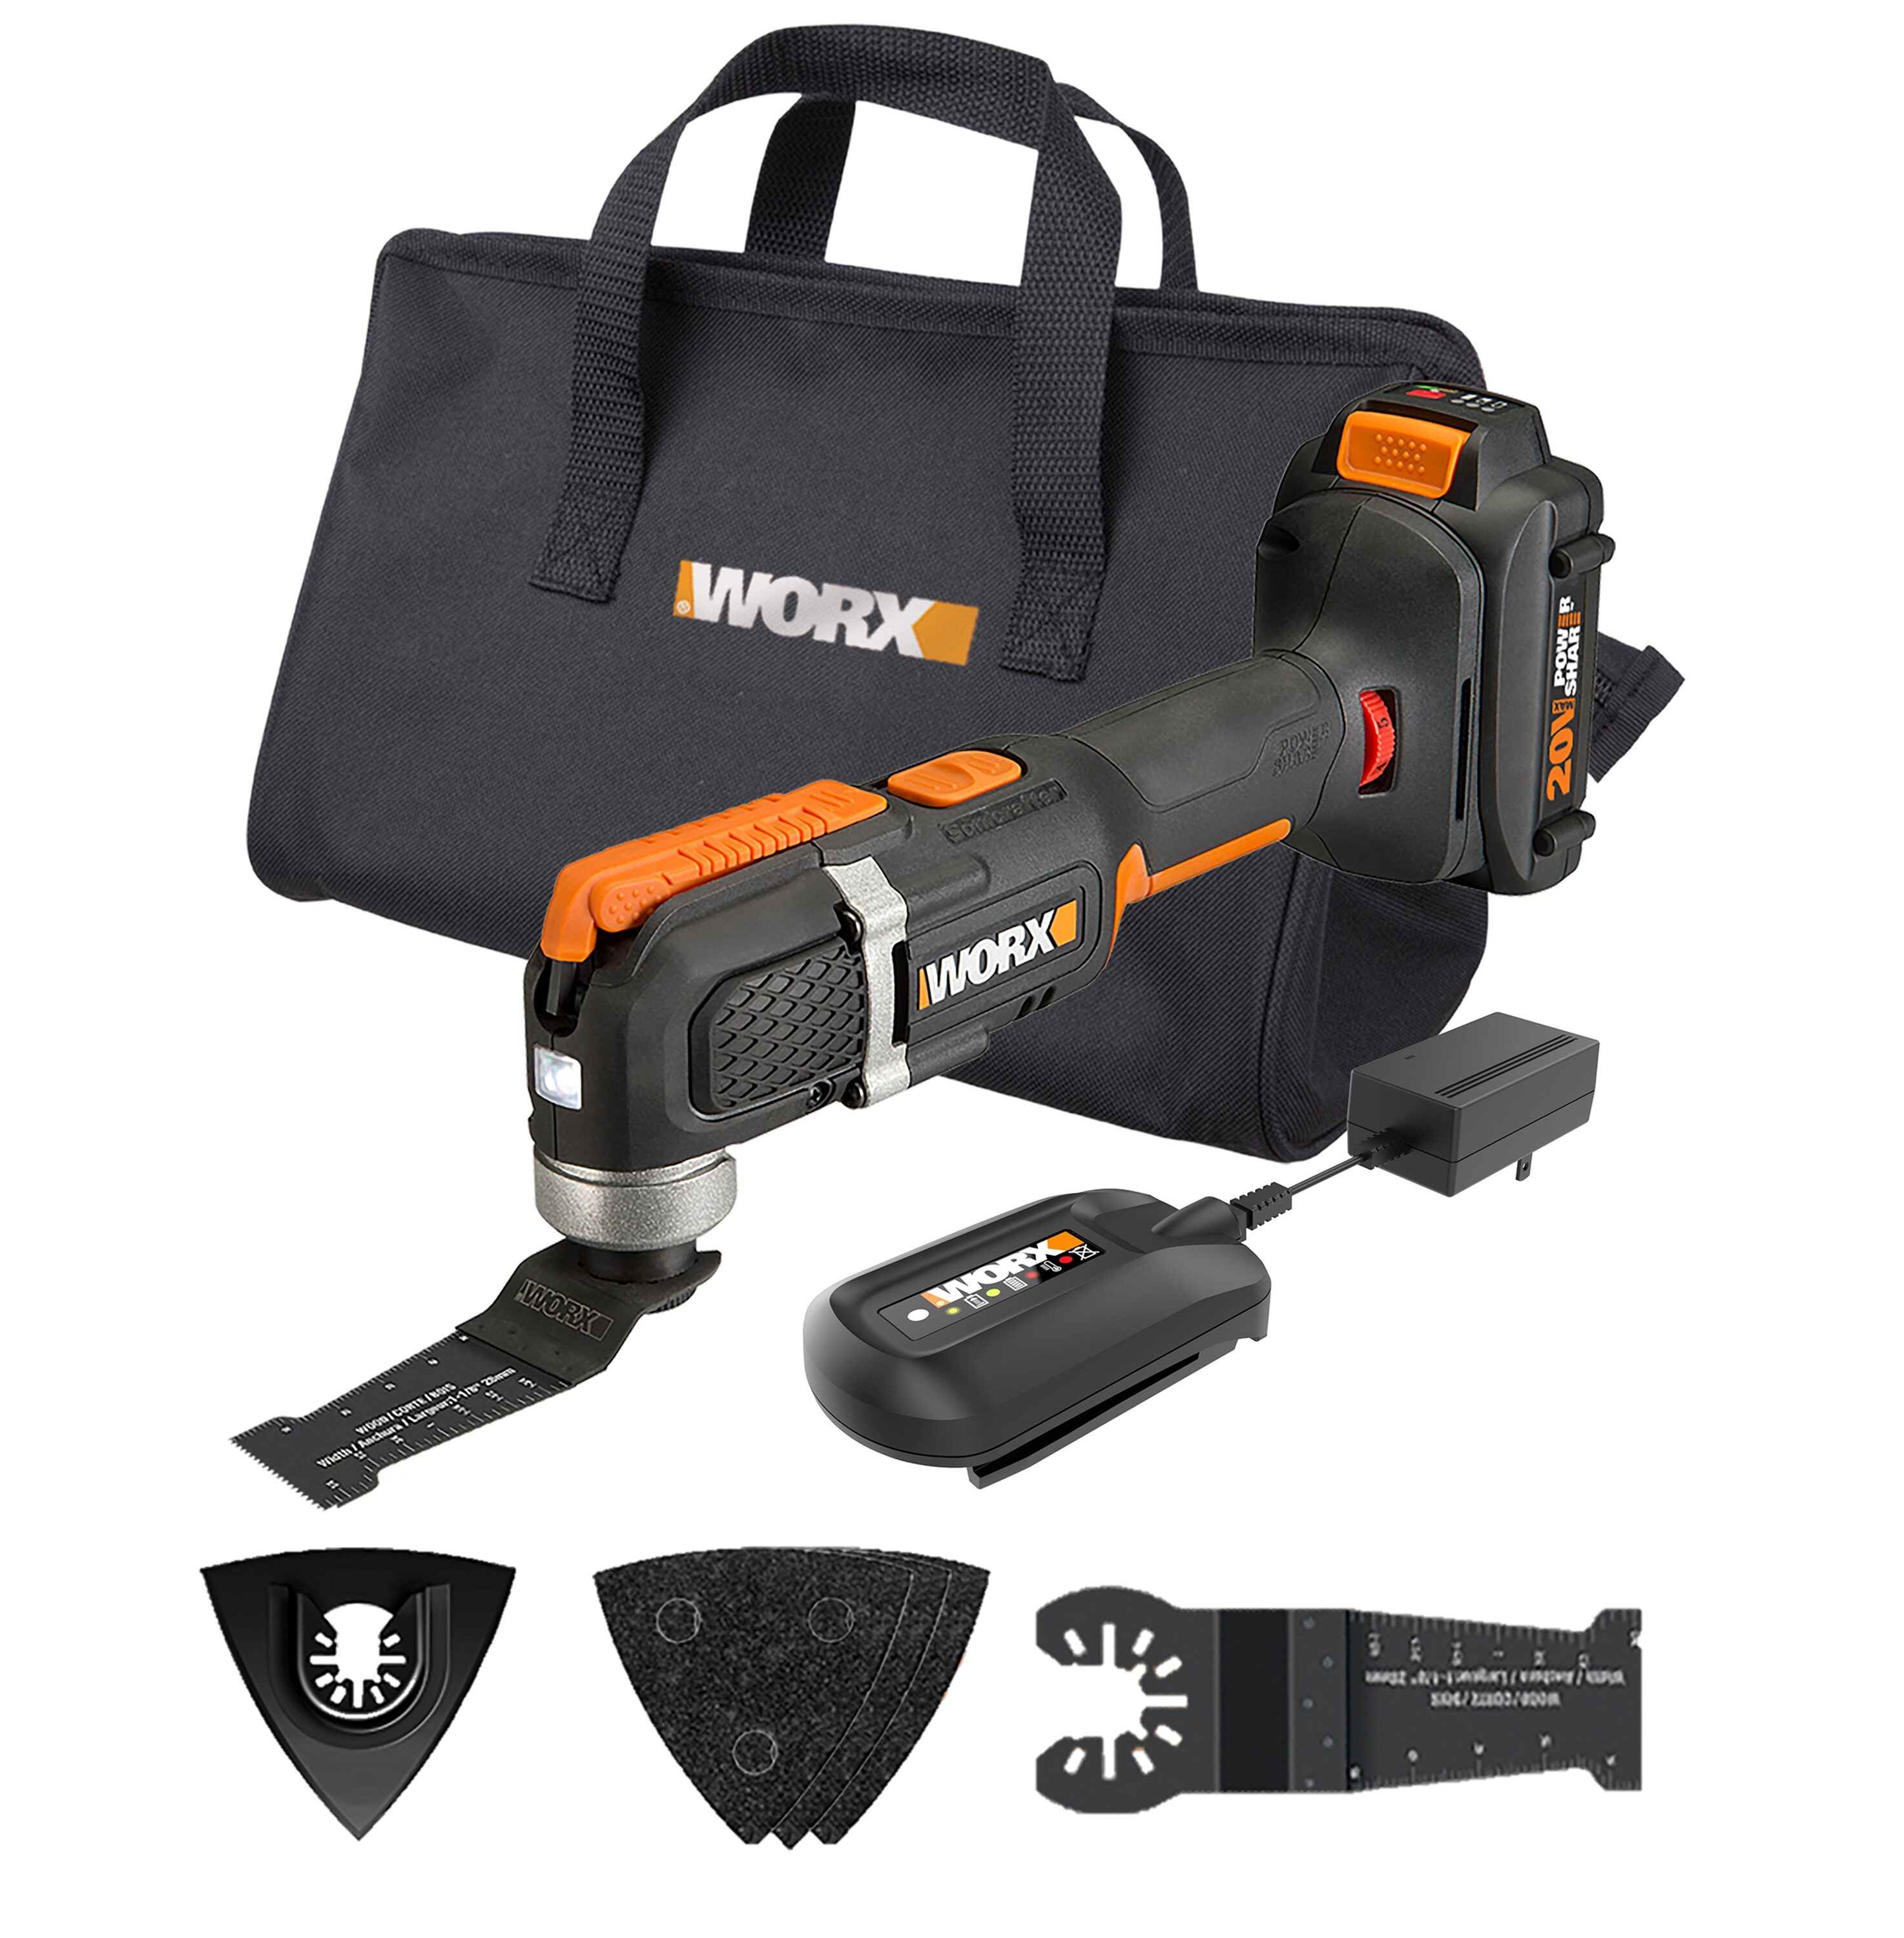 WORX POWER SHARE Cordless 20-volt Max Variable Speed 25-Piece Oscillating  Multi-Tool Kit with Soft Case (1-Battery Included) in the Oscillating Tool  Kits department at